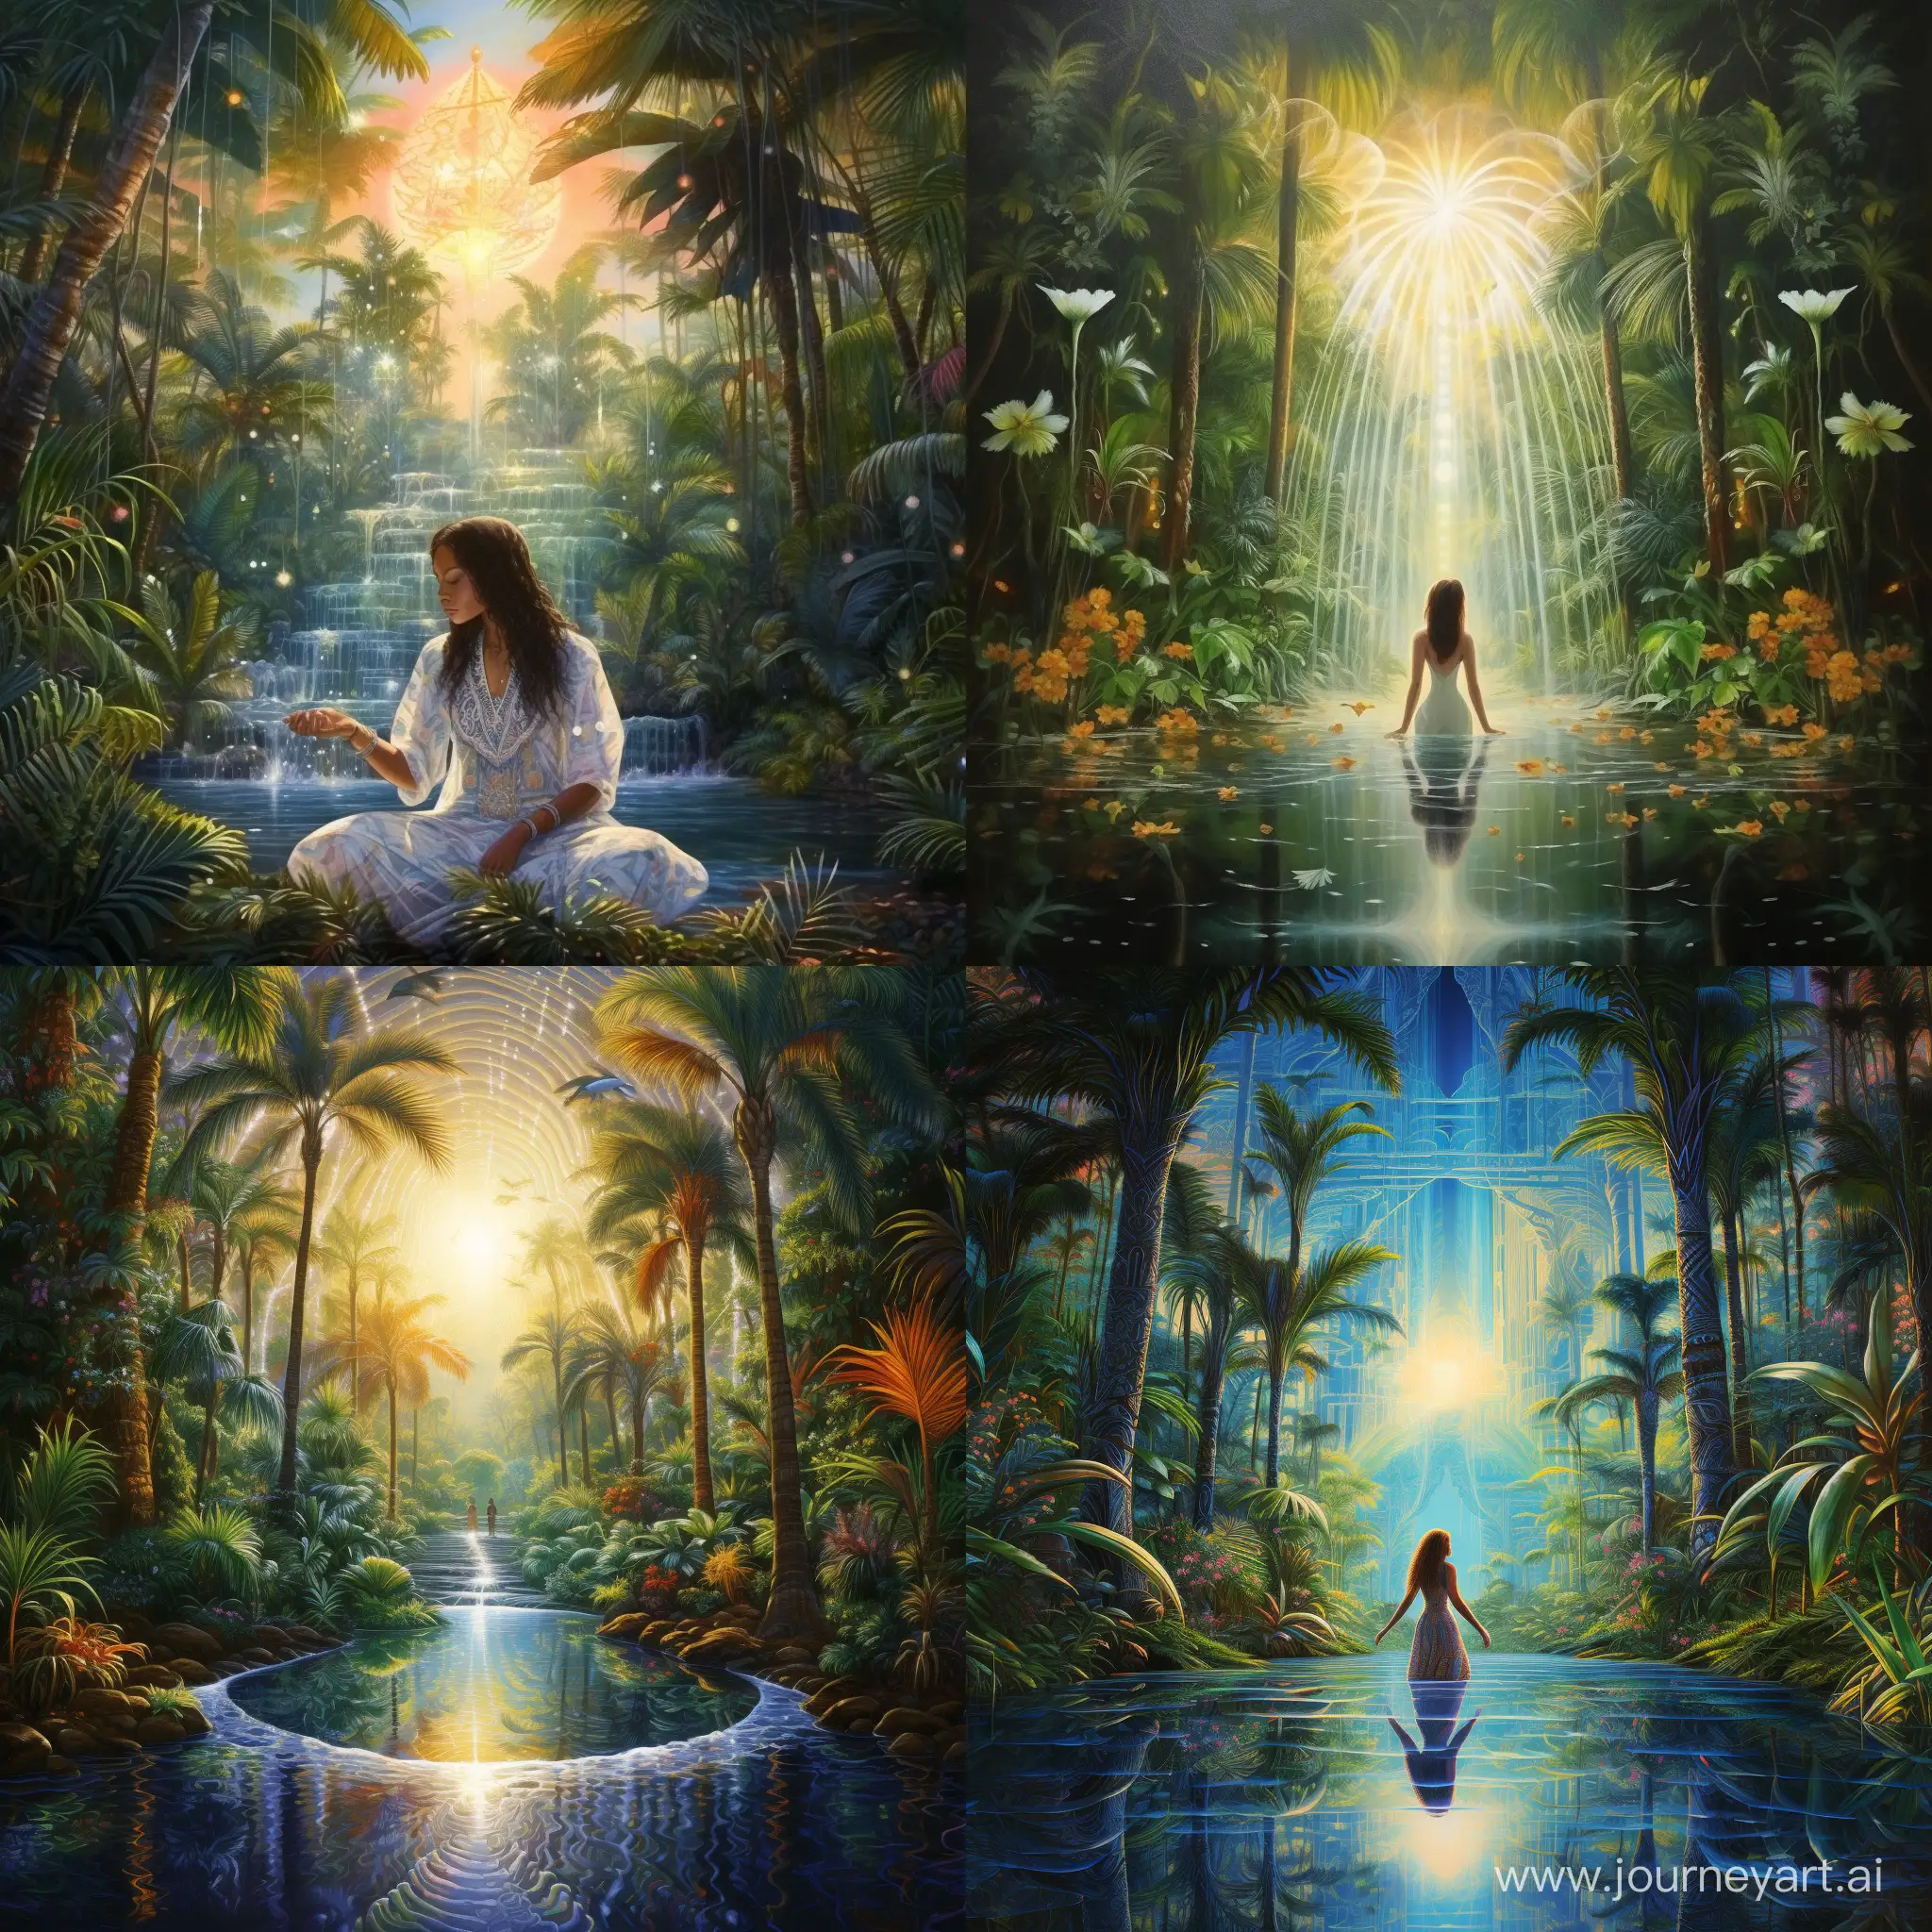 Healer-Channeling-Life-Energy-with-Palms-in-Artistic-AR-Composition